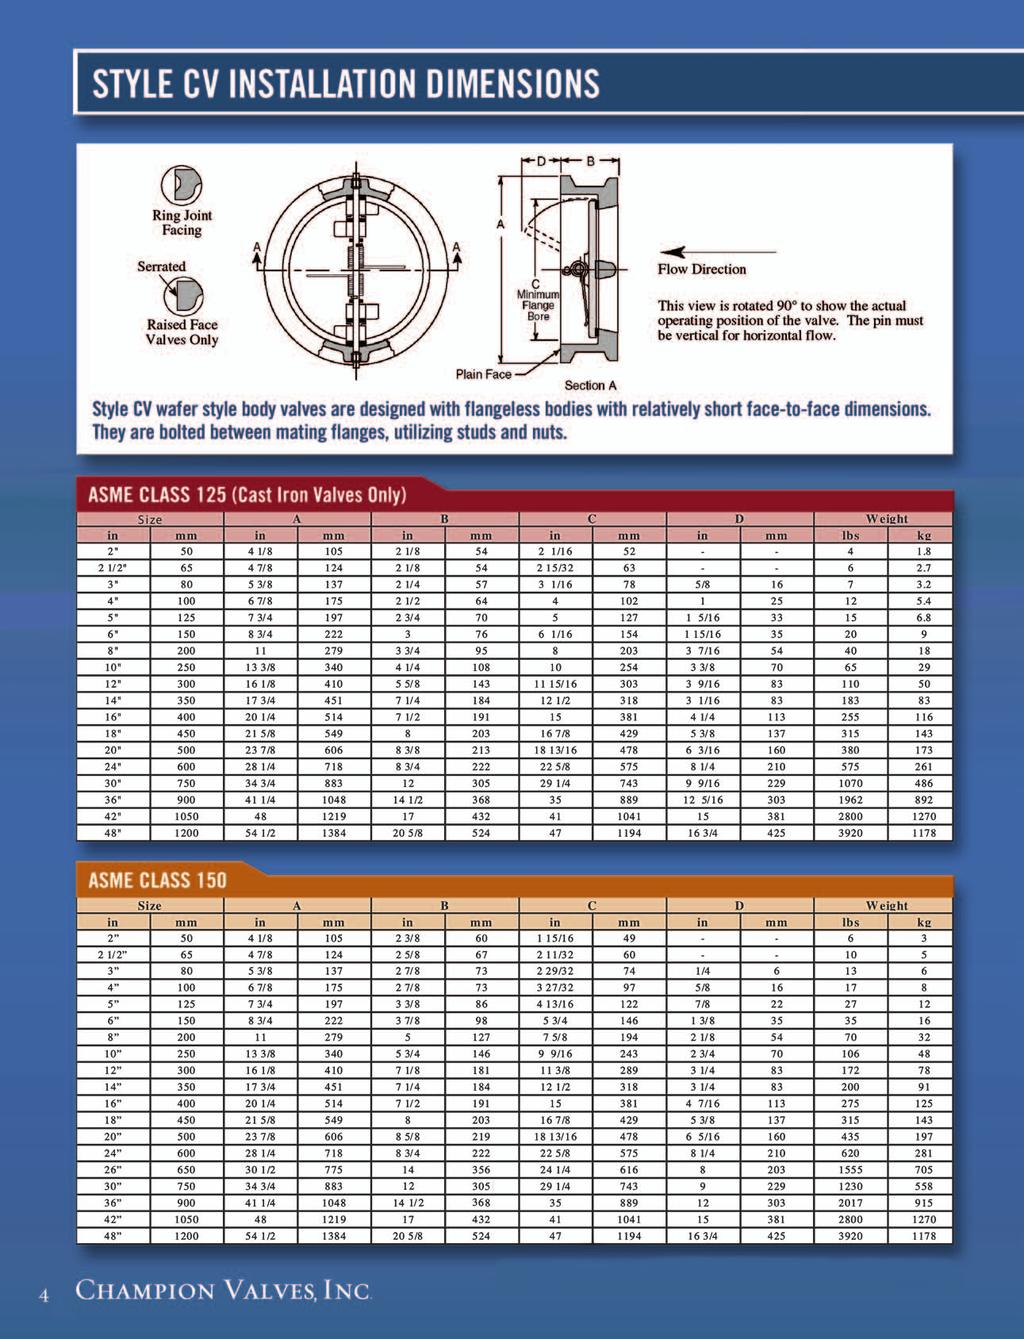 * Dimensions for lug and double flange body styles and bolting requirements are available upon request.